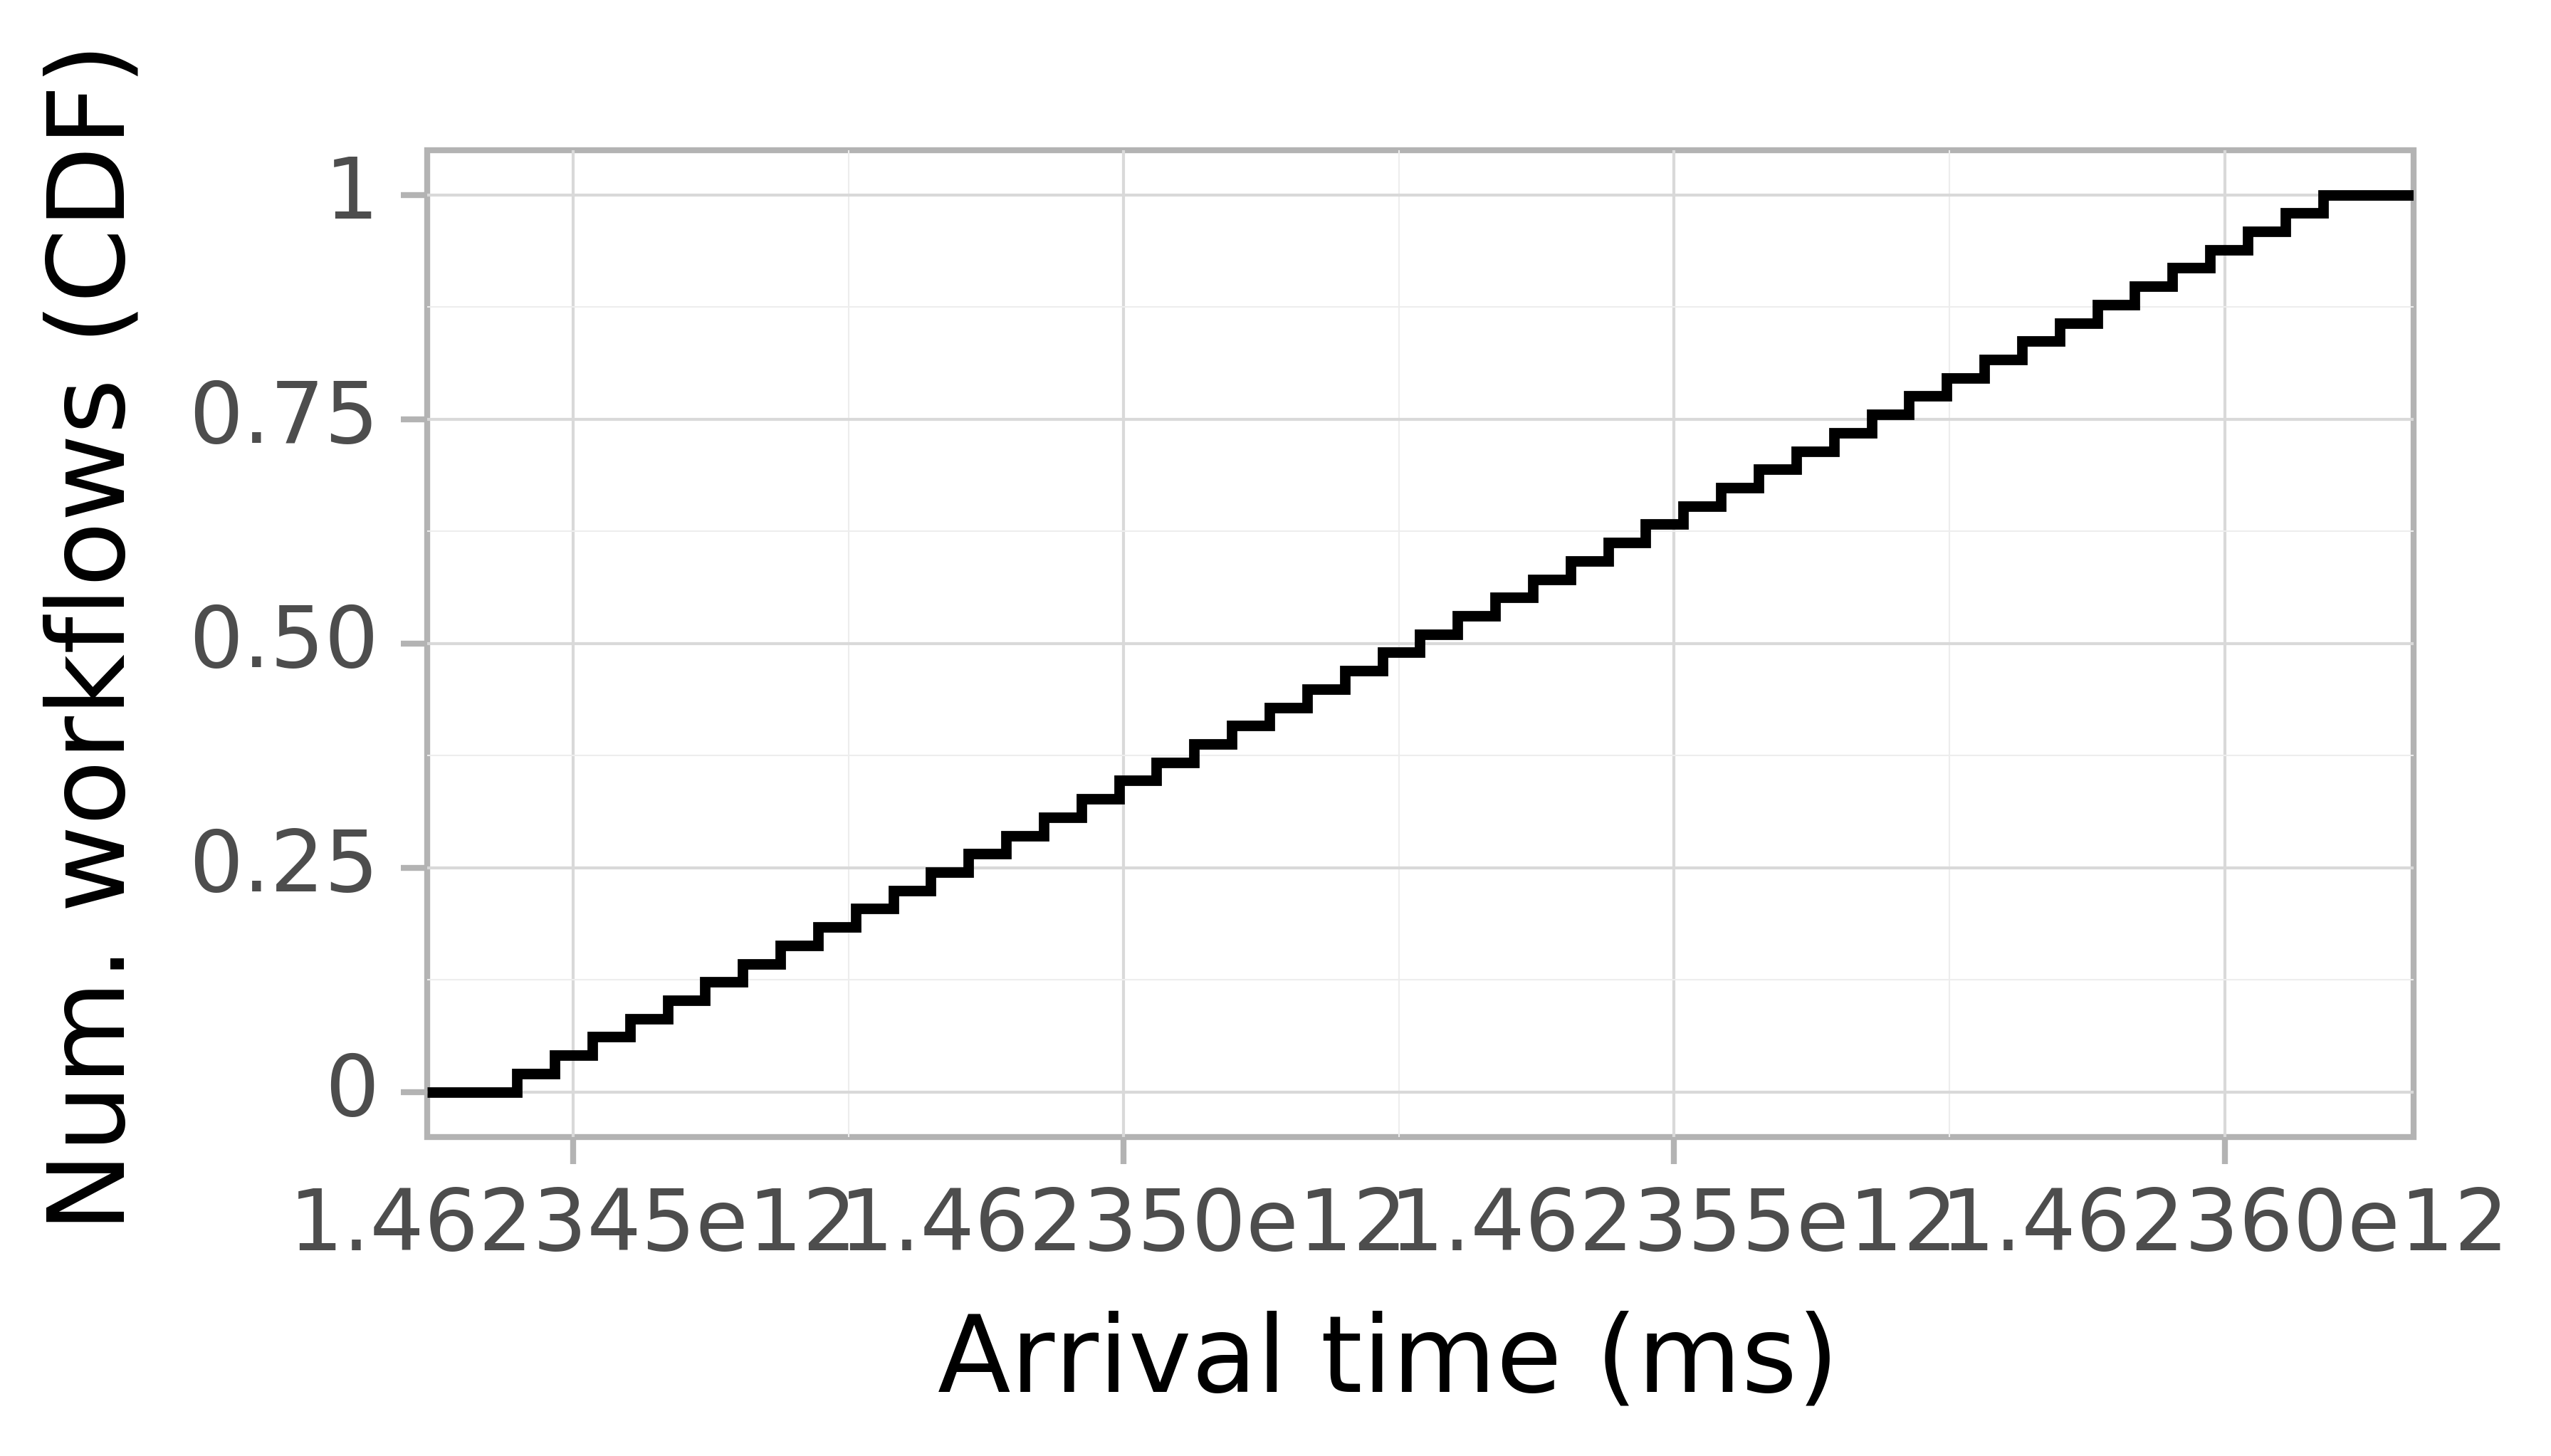 Job arrival CDF graph for the askalon-new_ee56 trace.